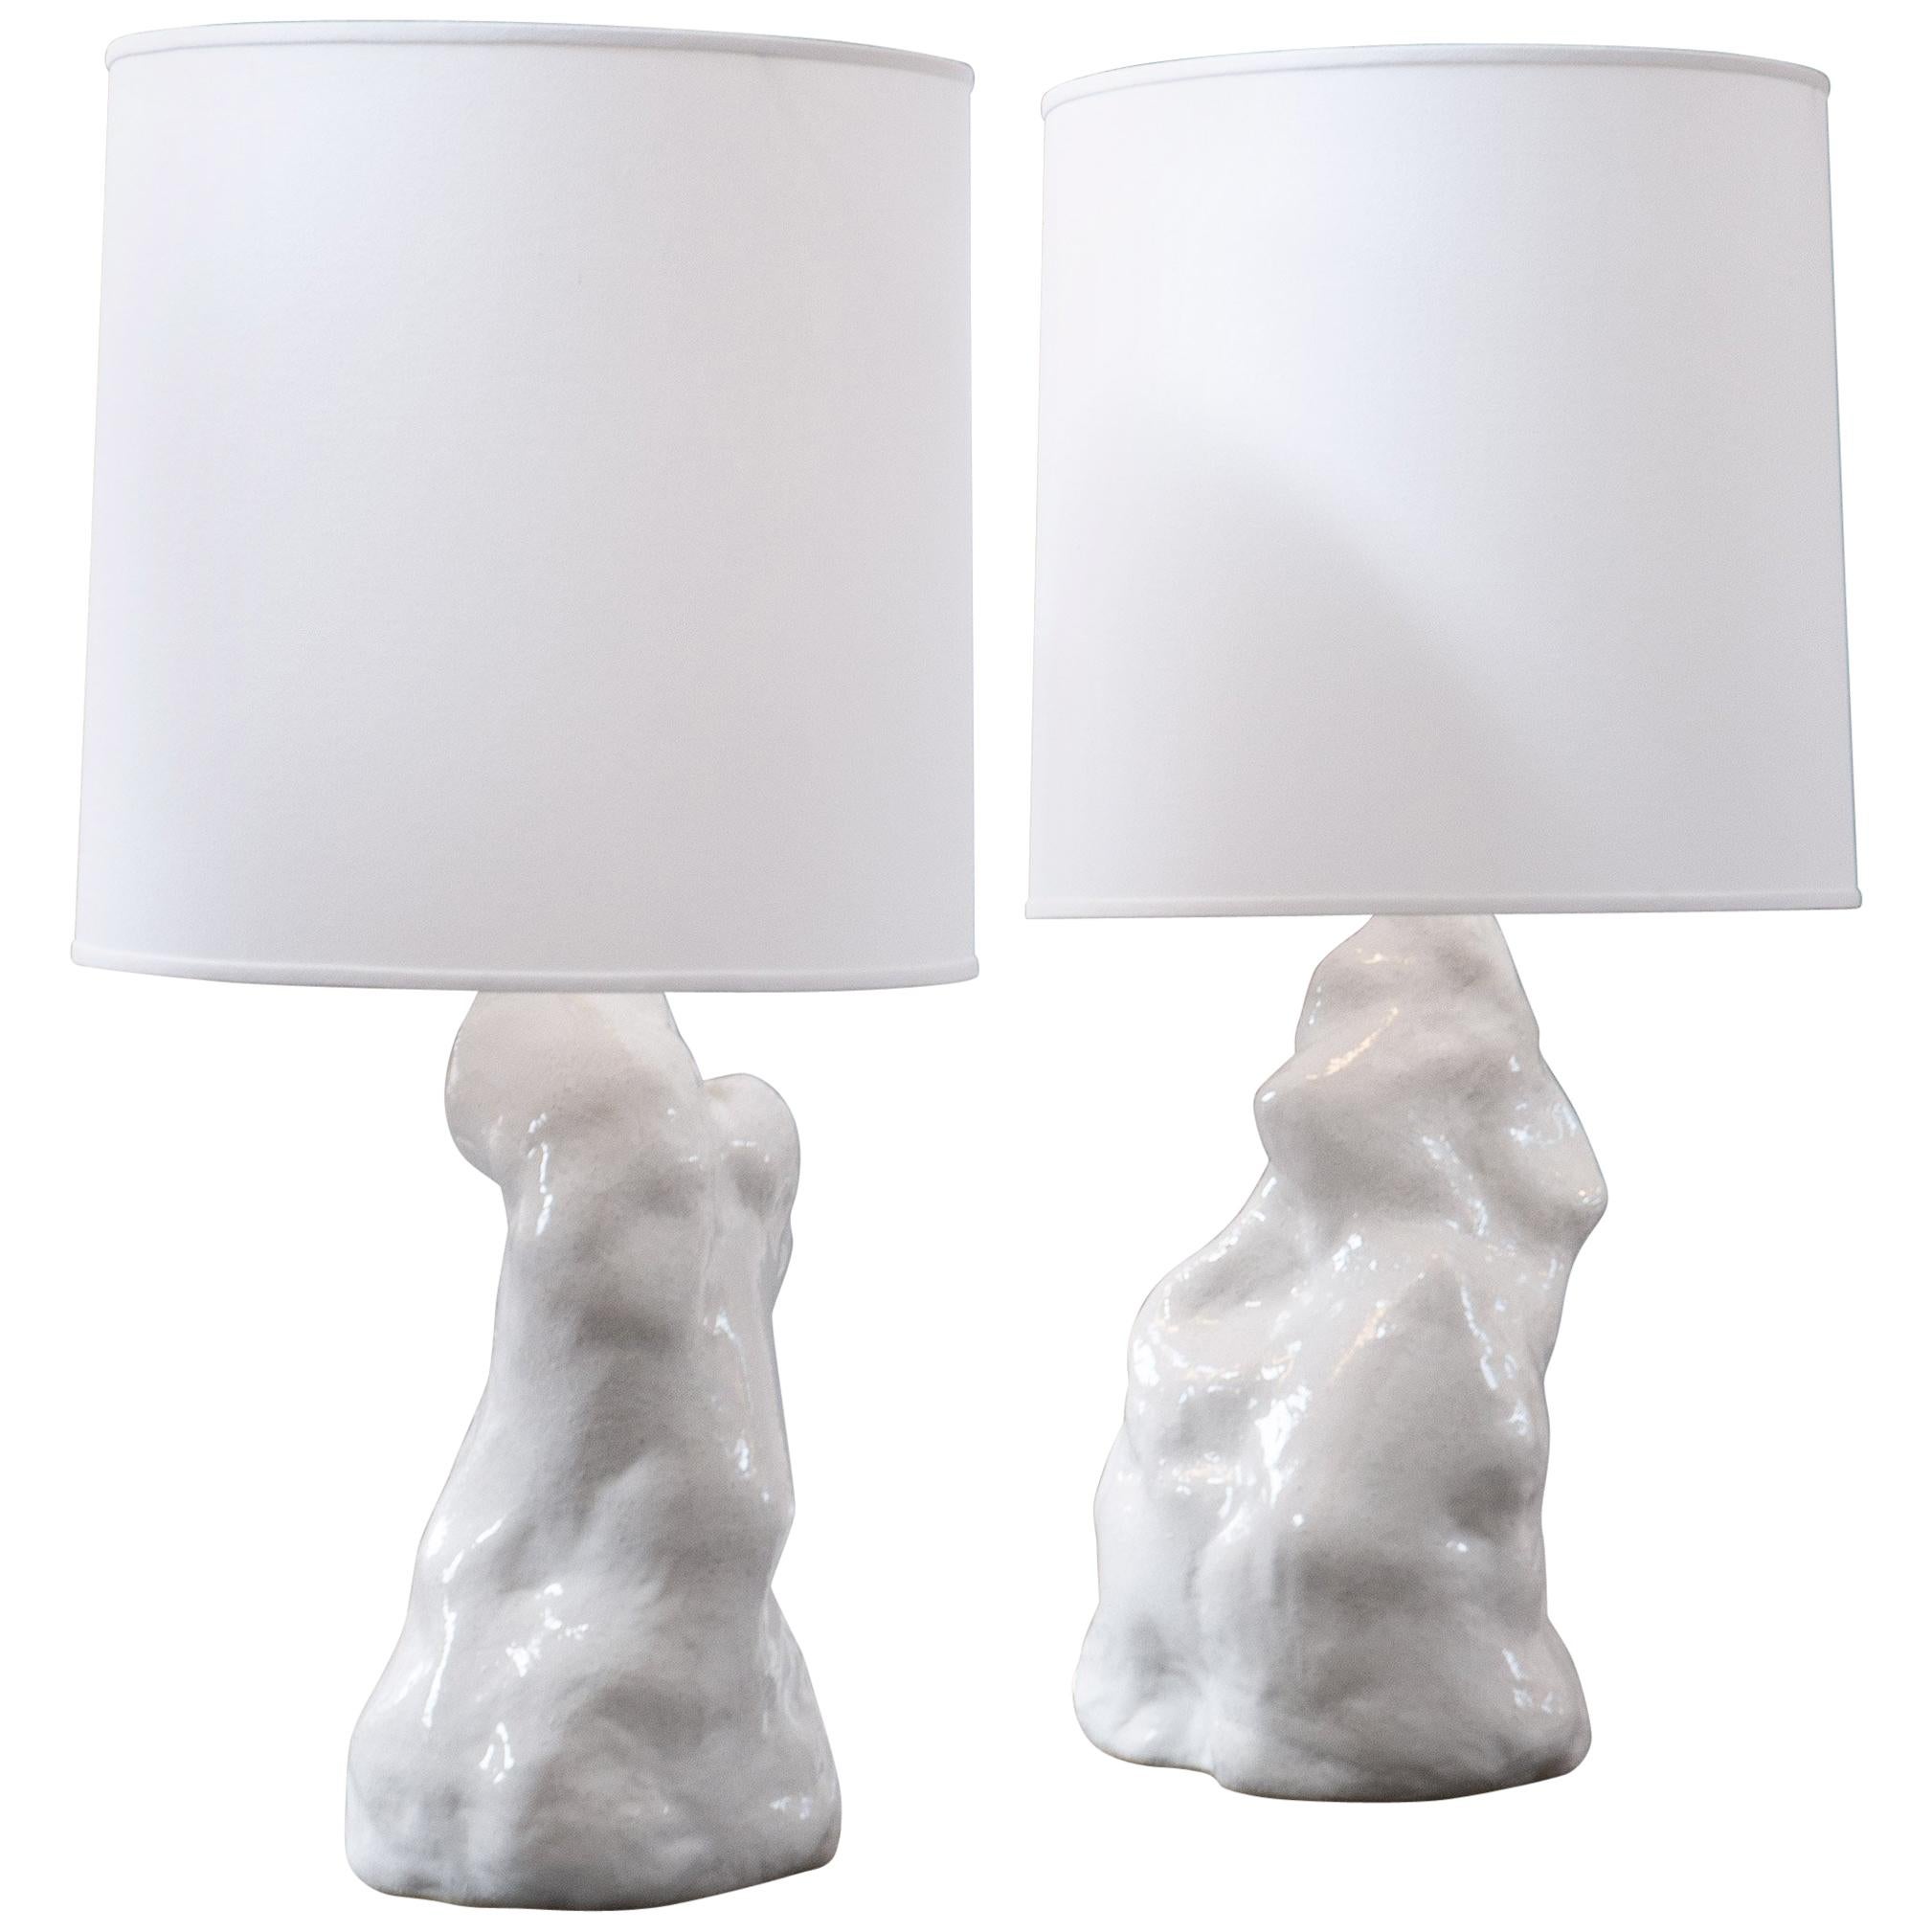 J Schatz Studio 2018 White Amorphous Table Lamp, Pair, One of a Kind For Sale